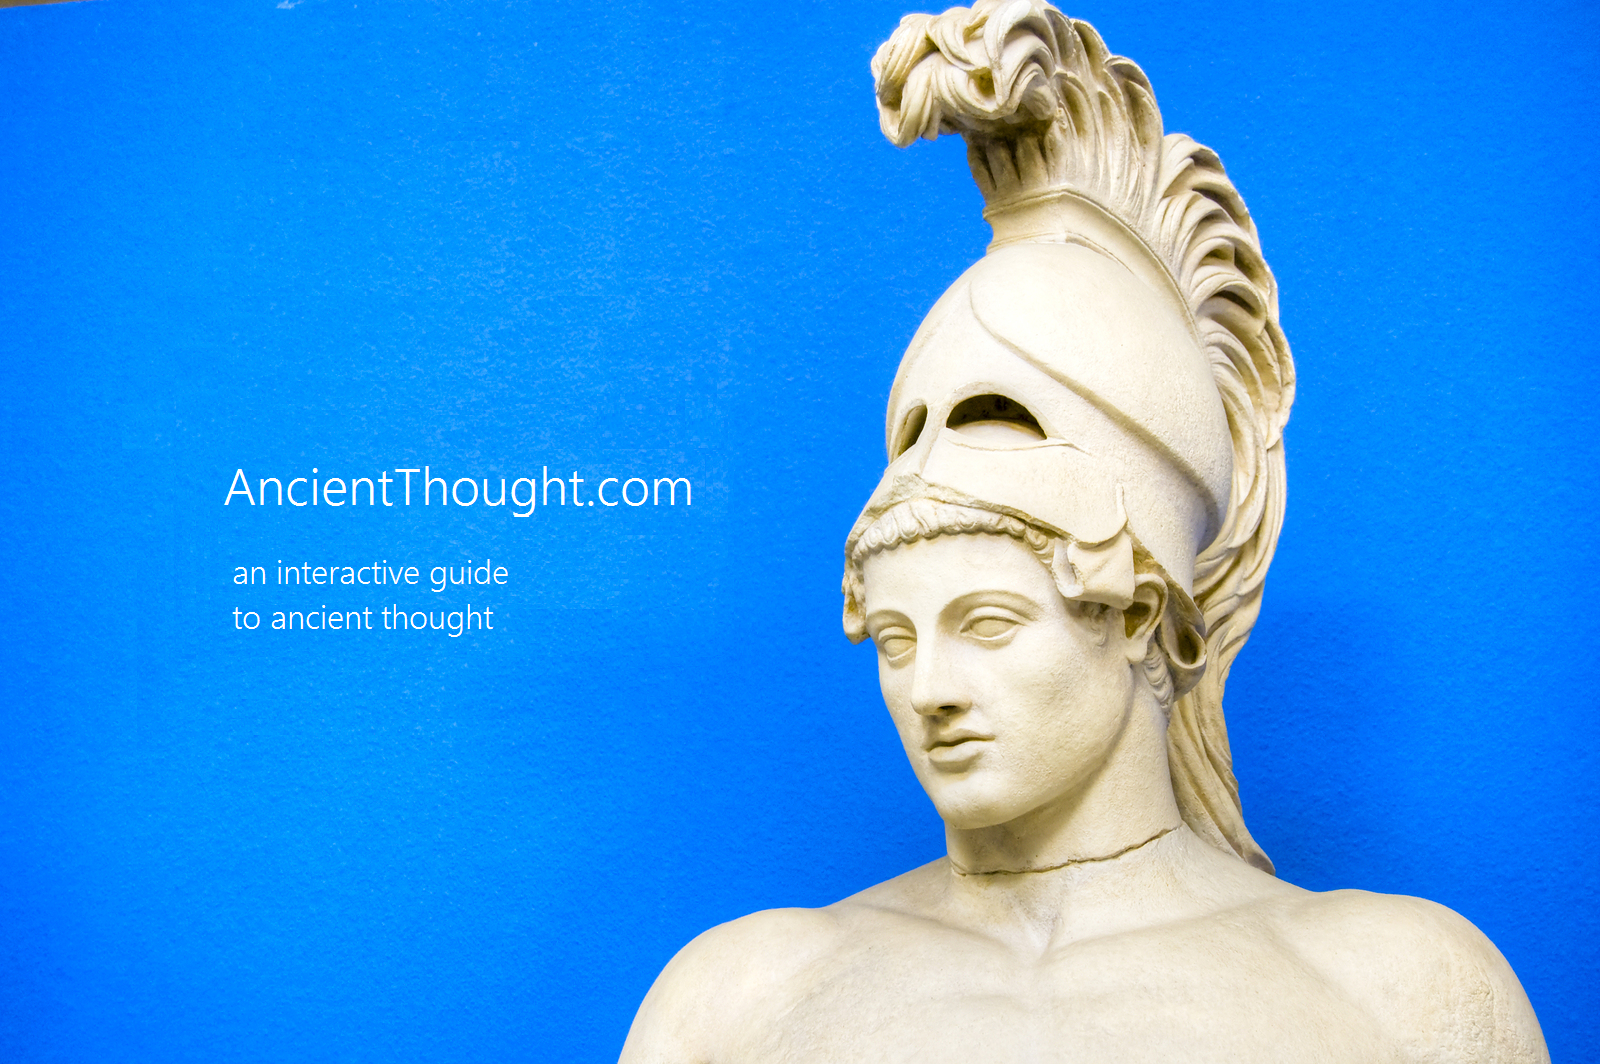 AncientThought.com looking for Contributors – The Two Cities